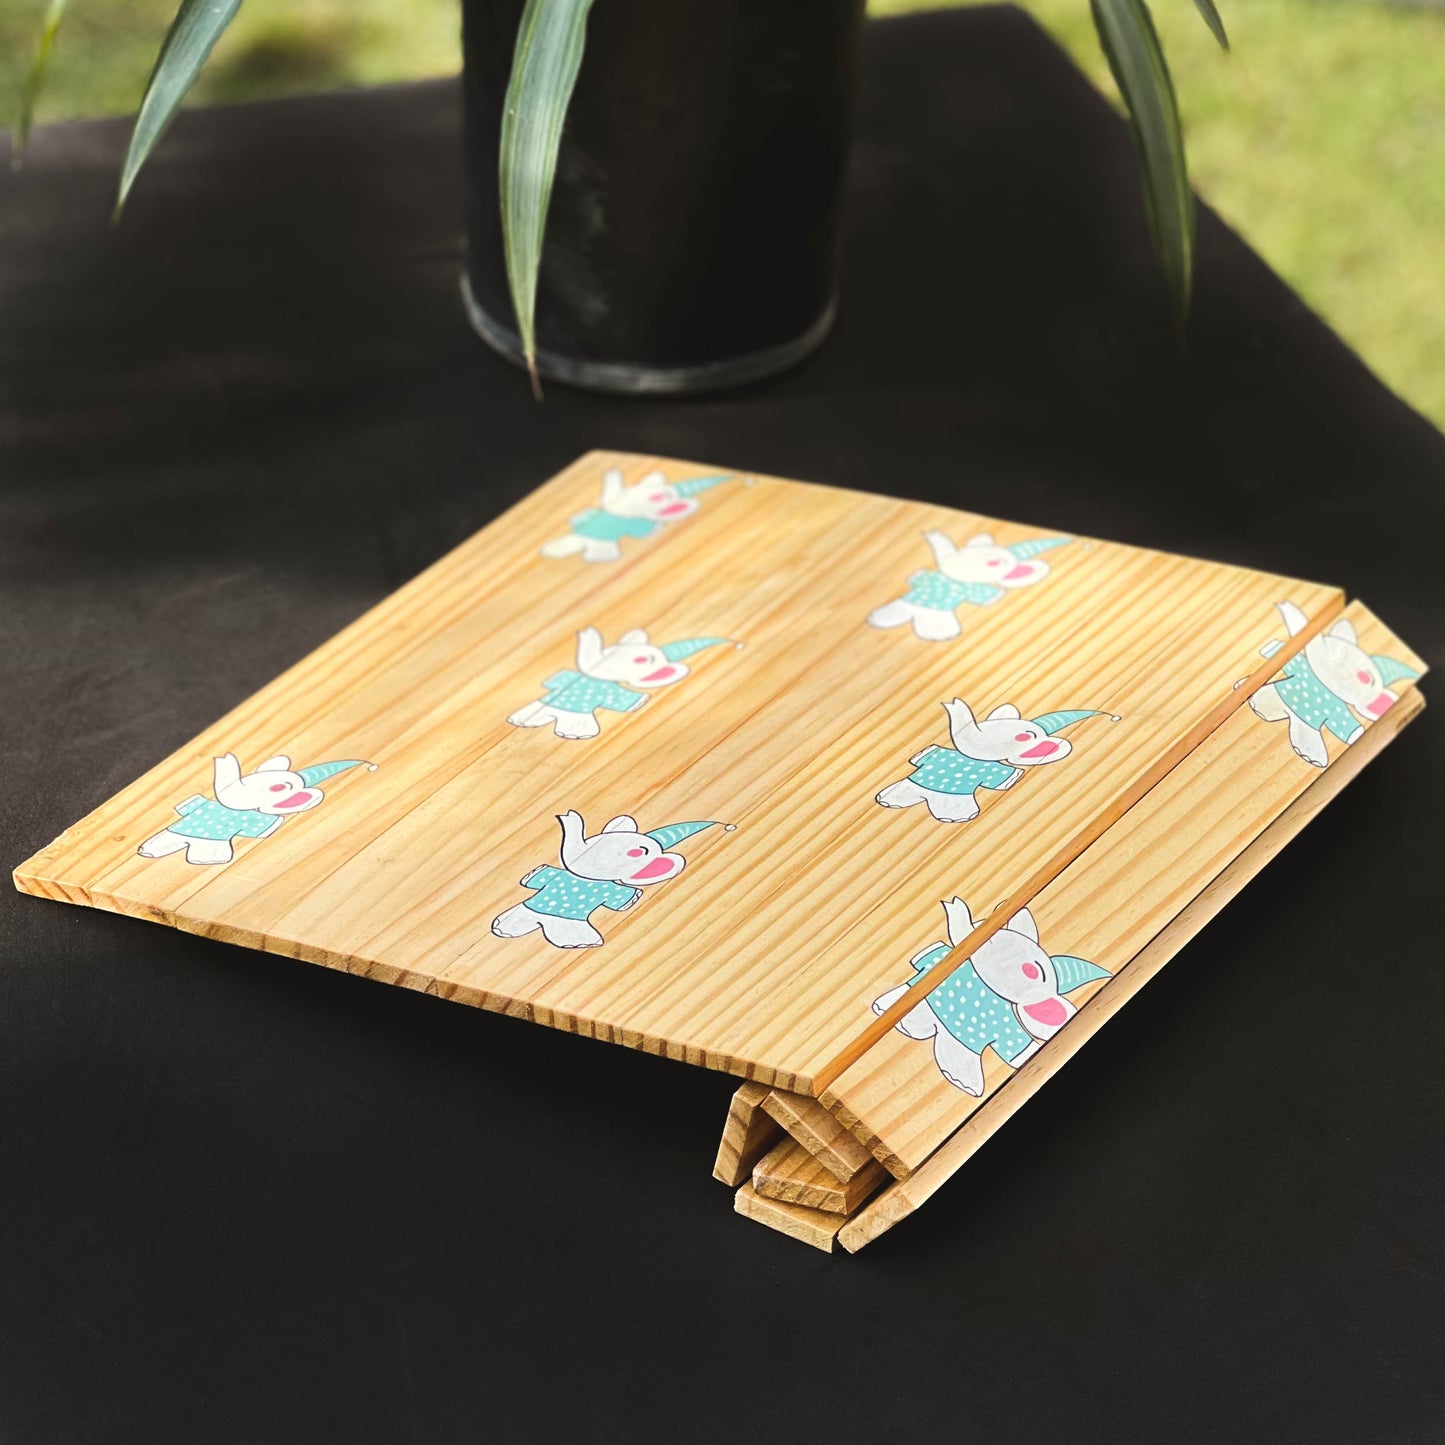 Dancing Elephant Place Mat | Multipurpose | Natural Reclaimed Wood | Foldable | Stain-Proof | Light Weight | Scrapshala